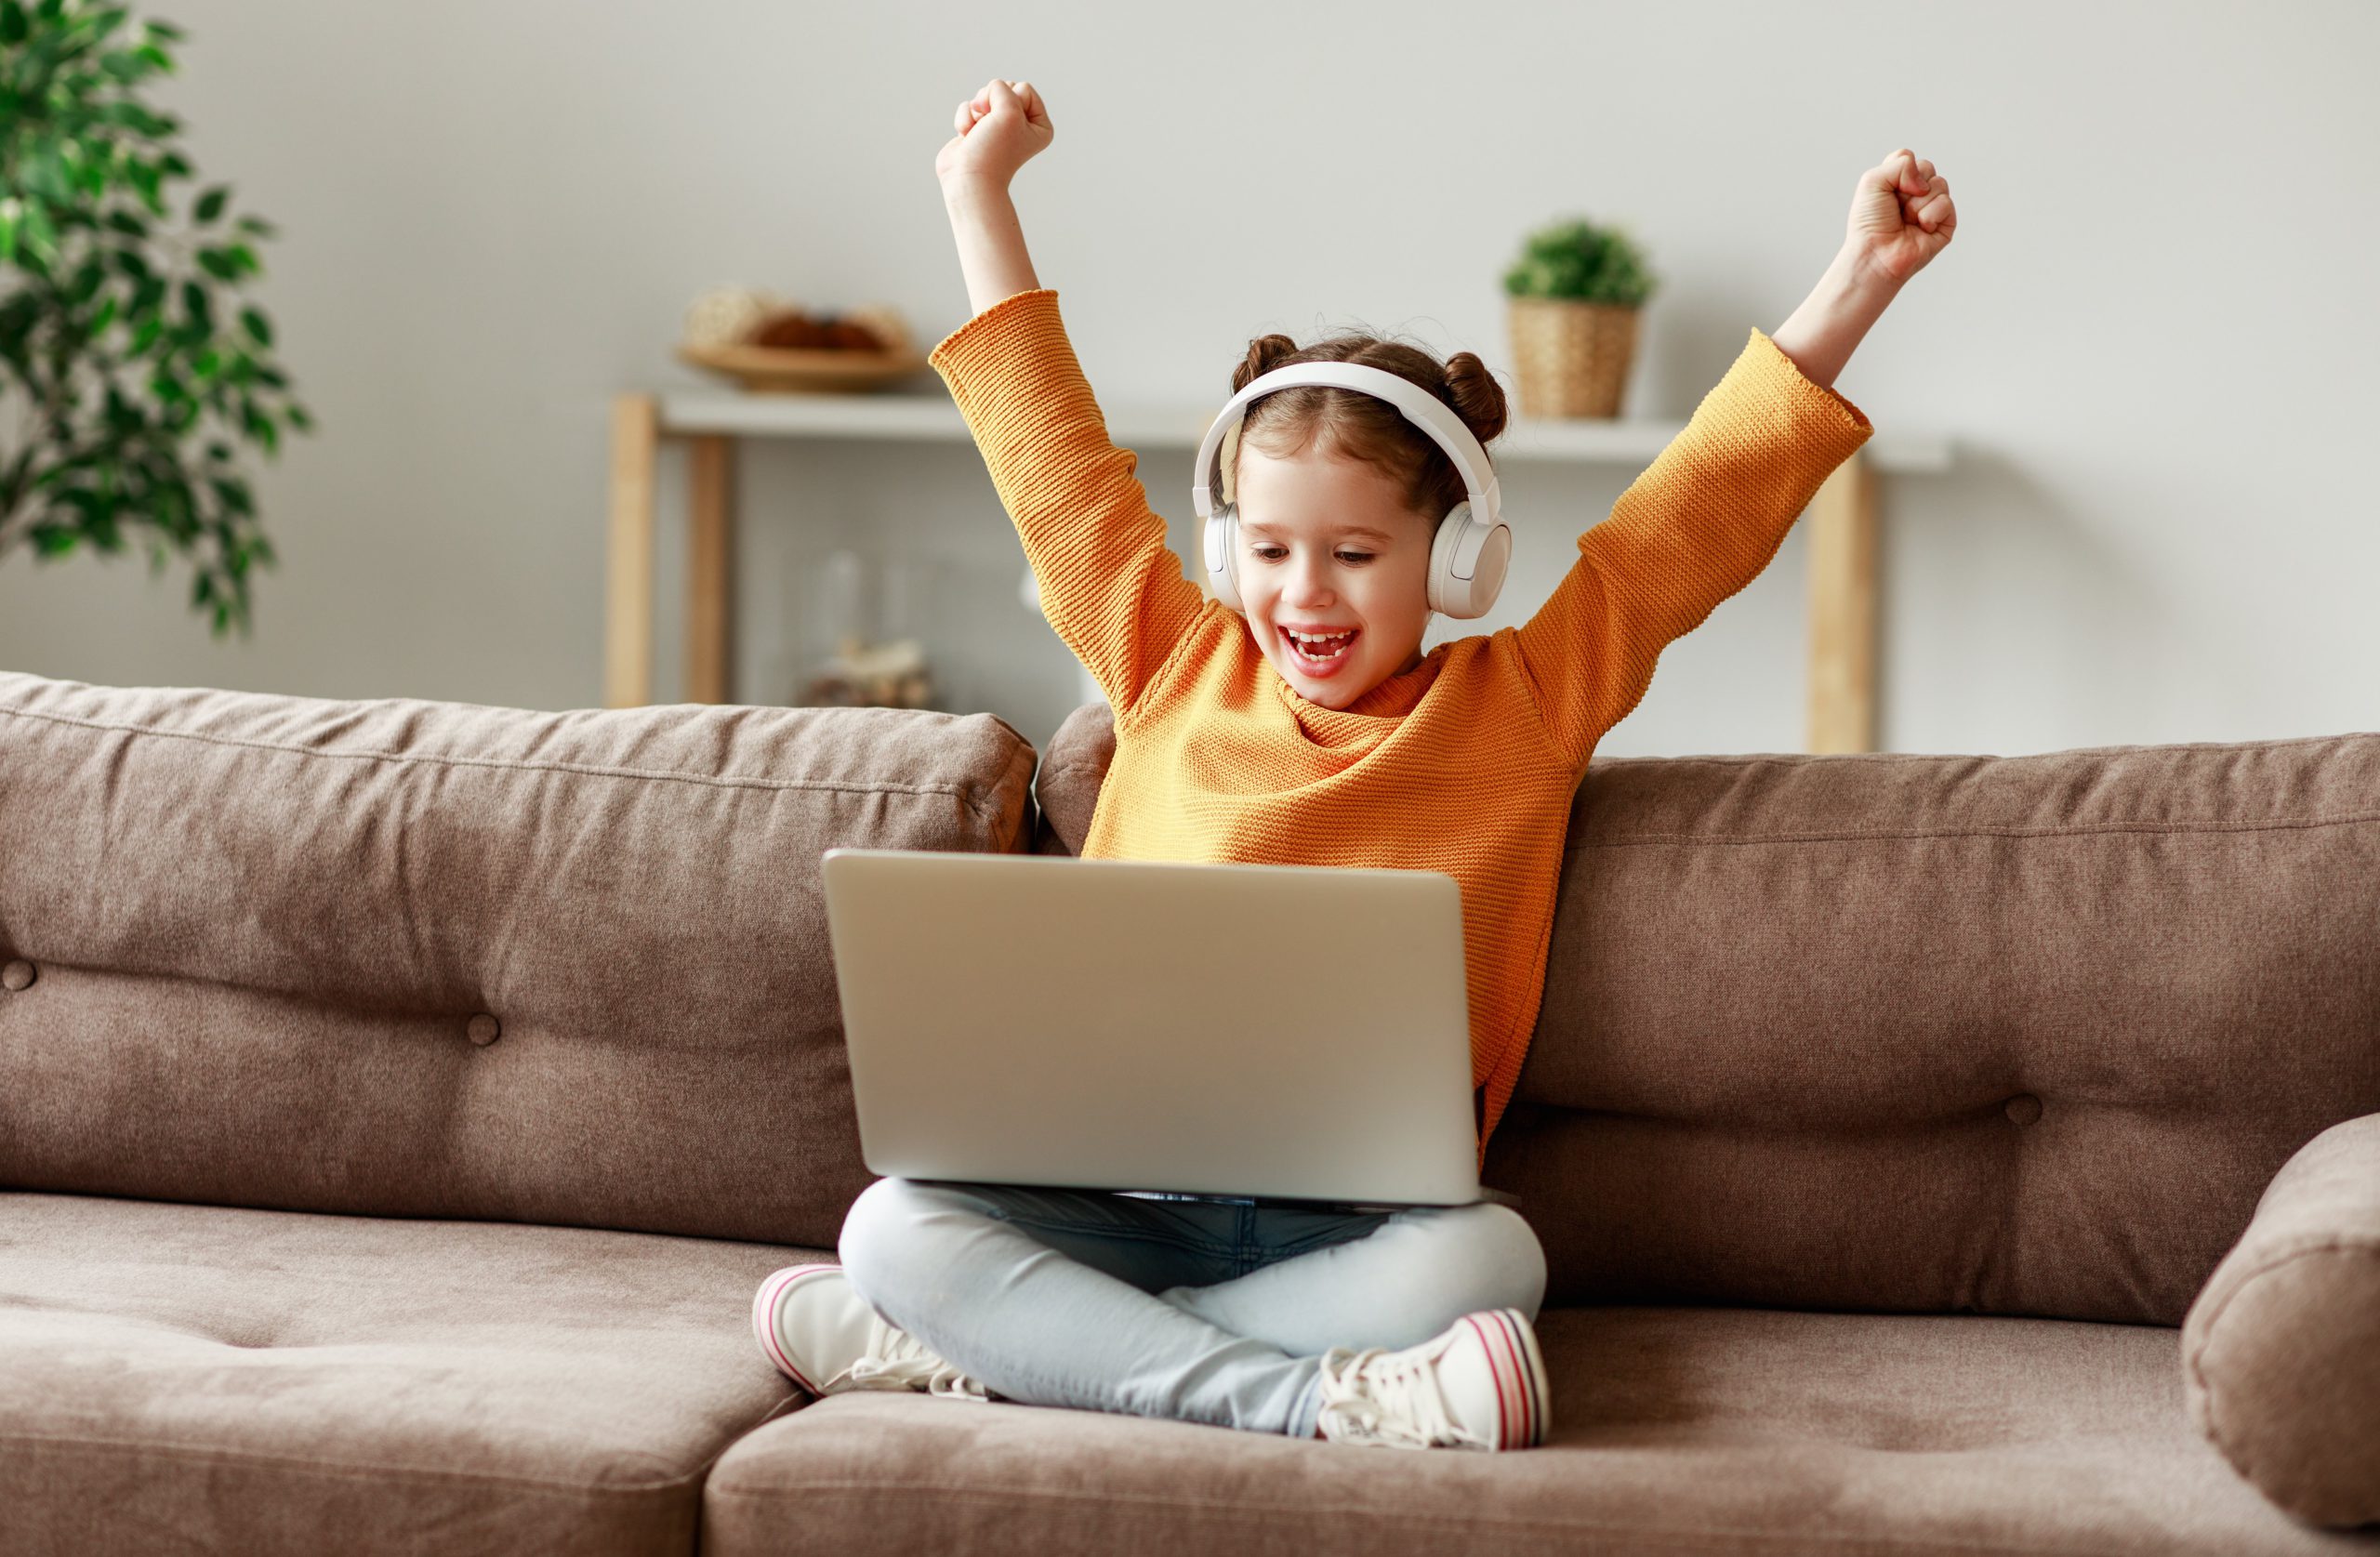 Happy girl in headphones raising arms and smiling while sitting crossed legged on sofa and celebrating victory in video game on laptop. Using tech for learning can help keep kids engaged and inspired.